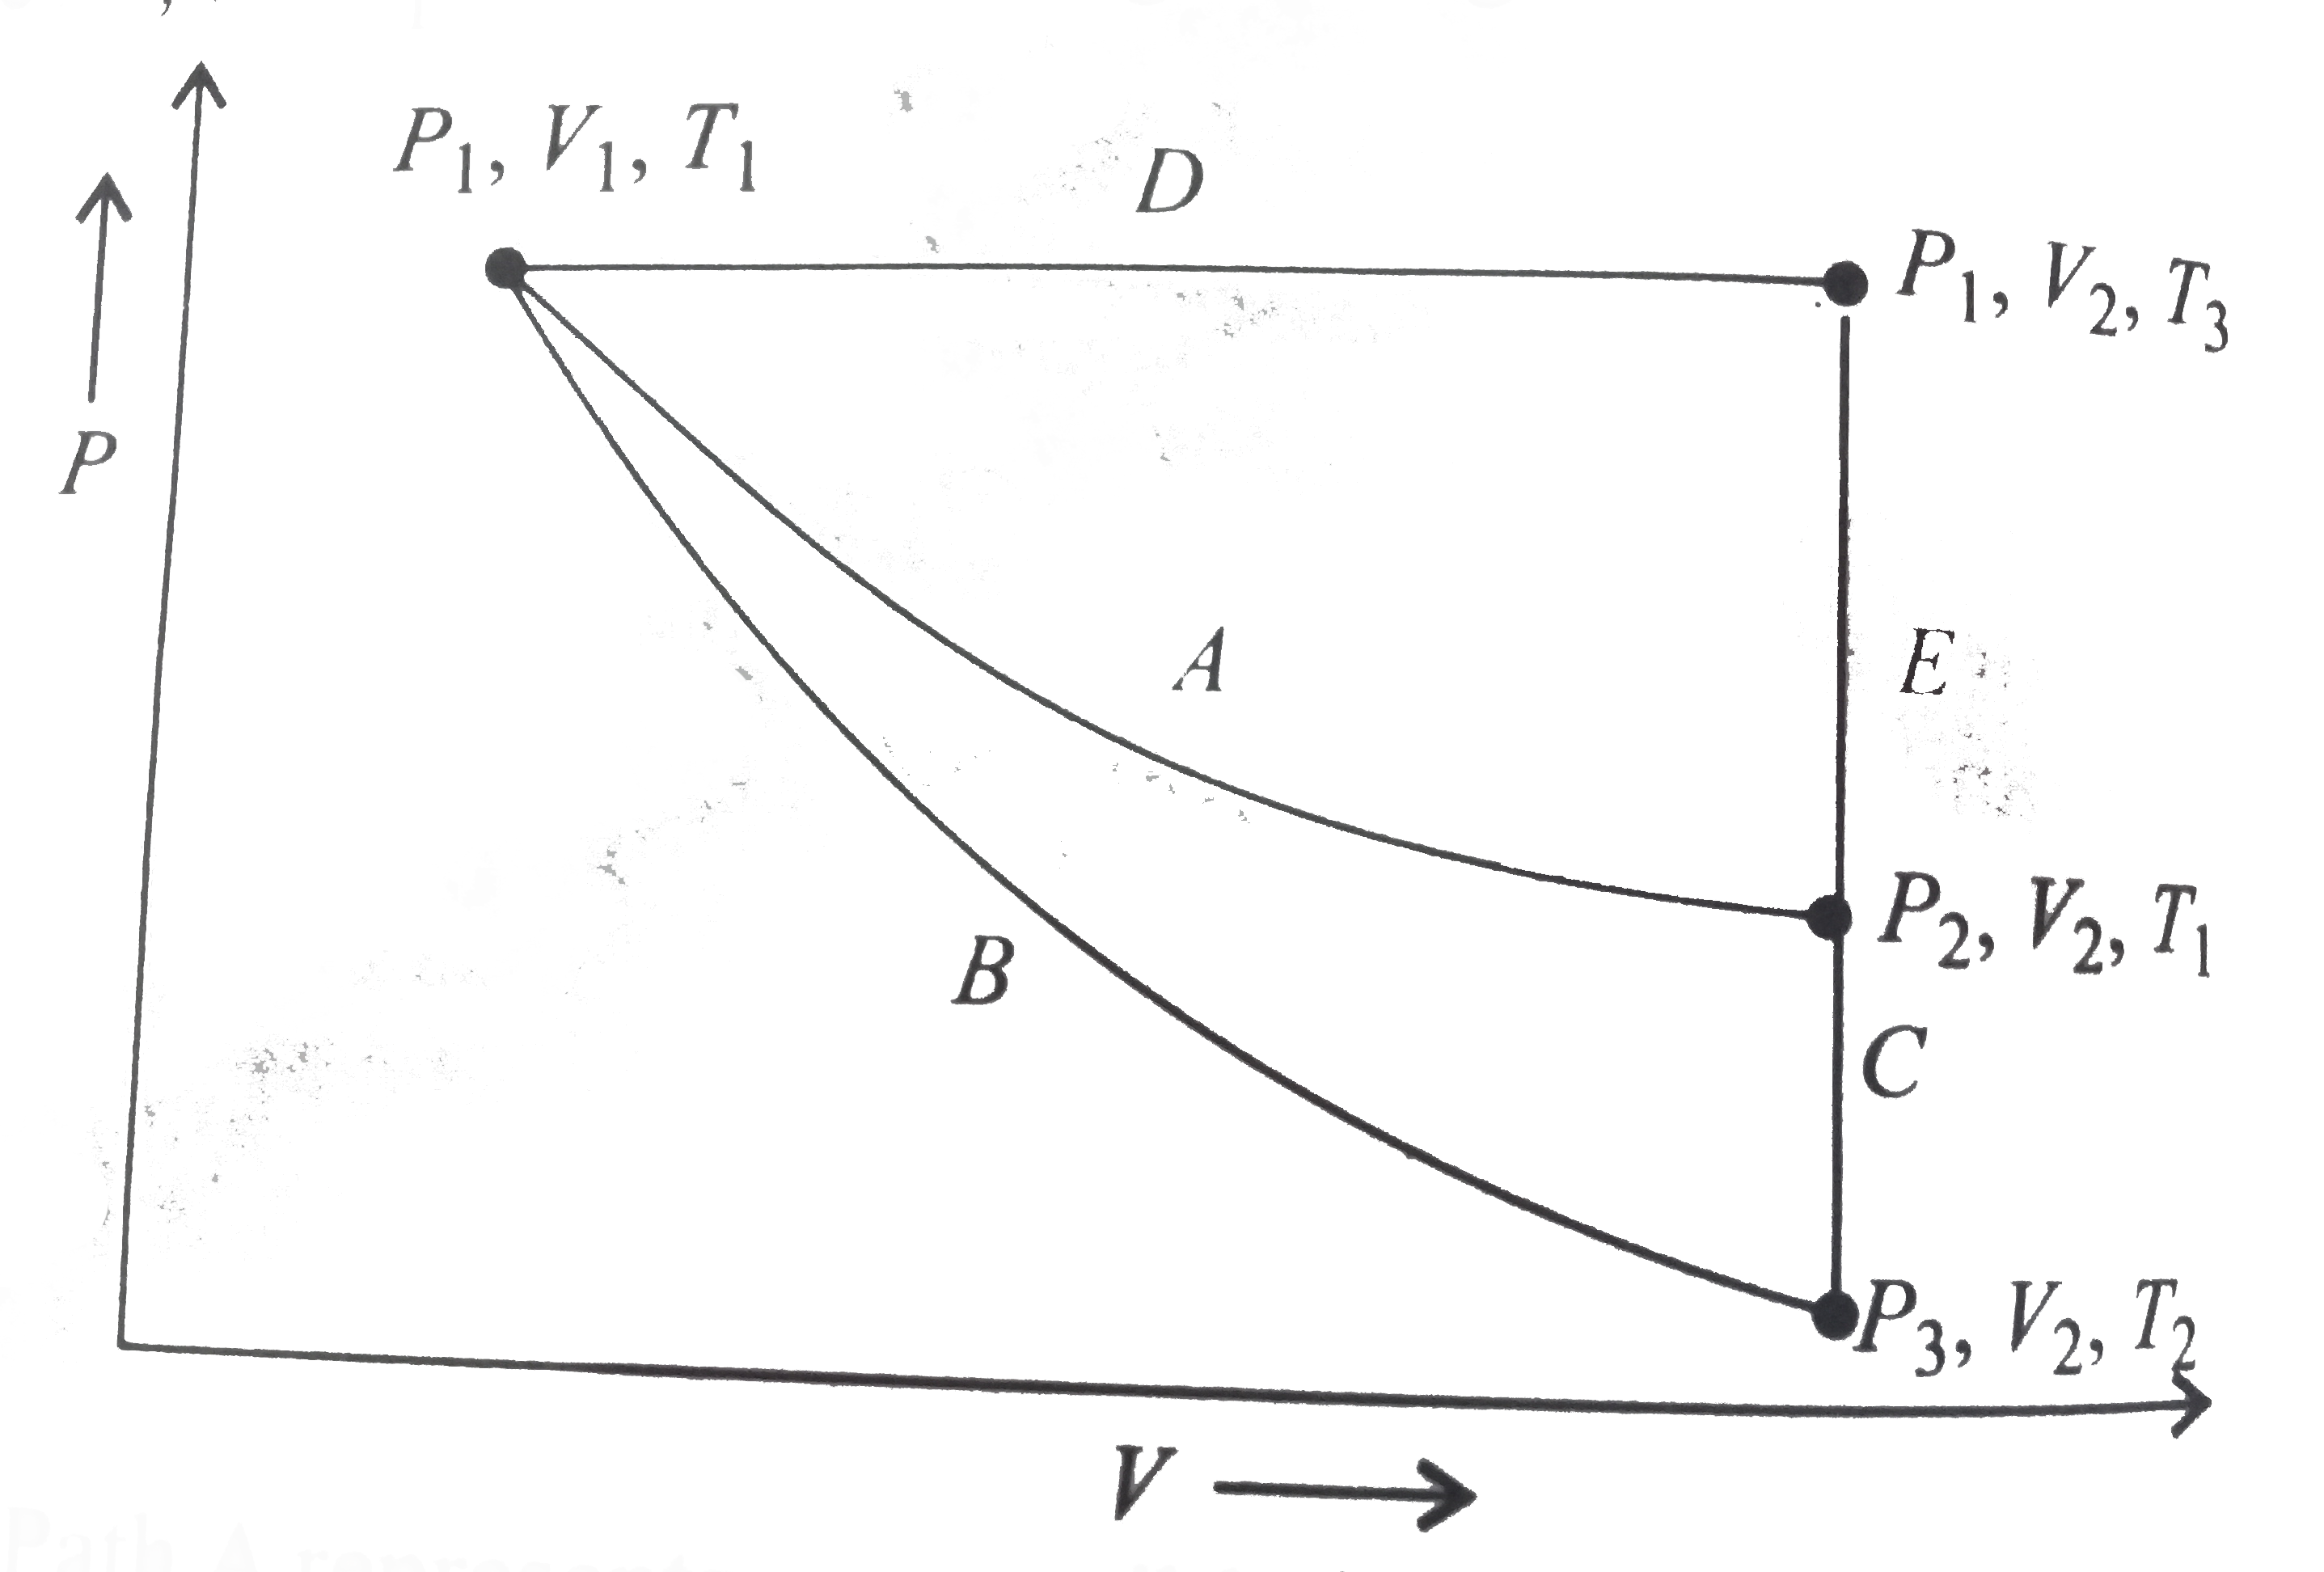 For an ideal gas, an illustratio of three different paths A(B+C) and (D+E) from an initial state P(1), V(1), T(1) to a final state P(2), V(2),T(1) is shown in the given figure.      Path Arepresents a reversible isothermal expansion form P(1),V(1) to P(2),V(2), Path (B+C) represents a reversible adiabatic expansion (B) from P(1),V(1),T(1)to P(3),V(2),T(2) followed by reversible heating the gas at constant volume (C)from P(3),V(2),T(2) to P(2),V(2),T(1). Path (D+E) represents a reversible expansion at constant pressure P(1)(D) from P(1),V(1),T(1) to P(1),V(2),T(3) followed  by a reversible cooling at constant volume V(2)(E) from P(1),V(2),T(3) to P(2),V(2),T(1).   What is DeltaS for path A?